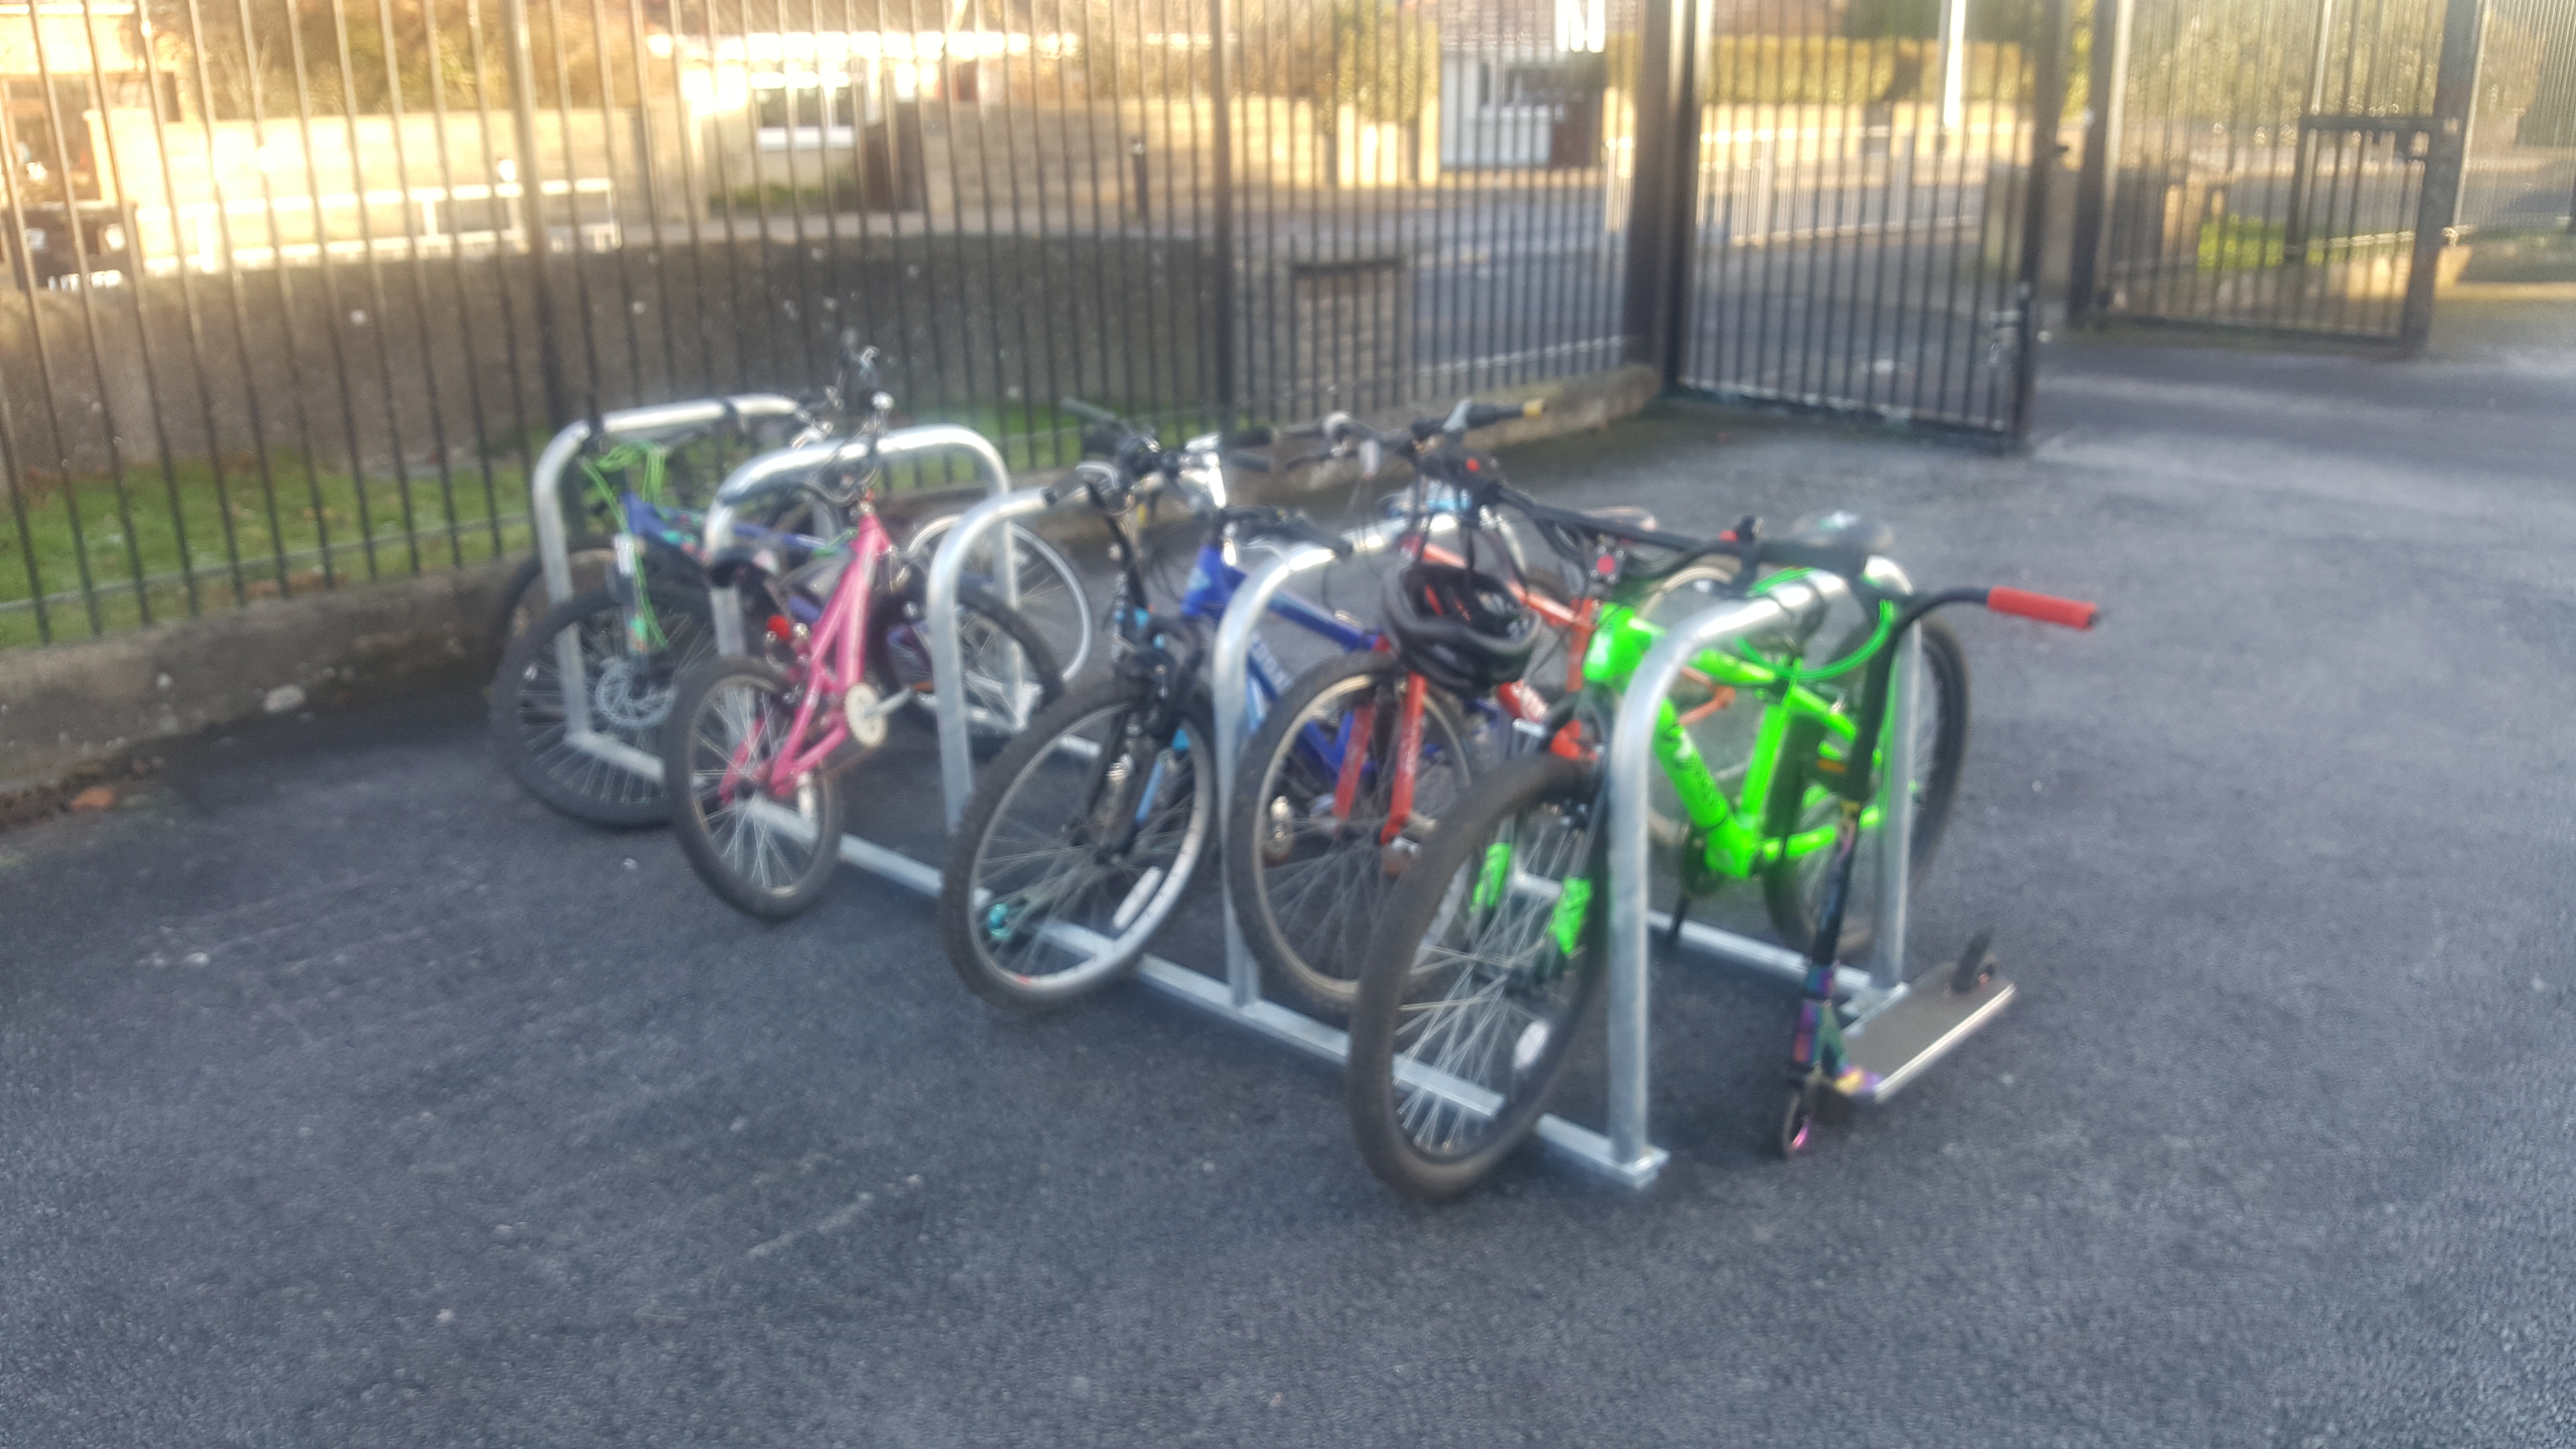 This photo shows a cycle rack with five stands in a school yard.